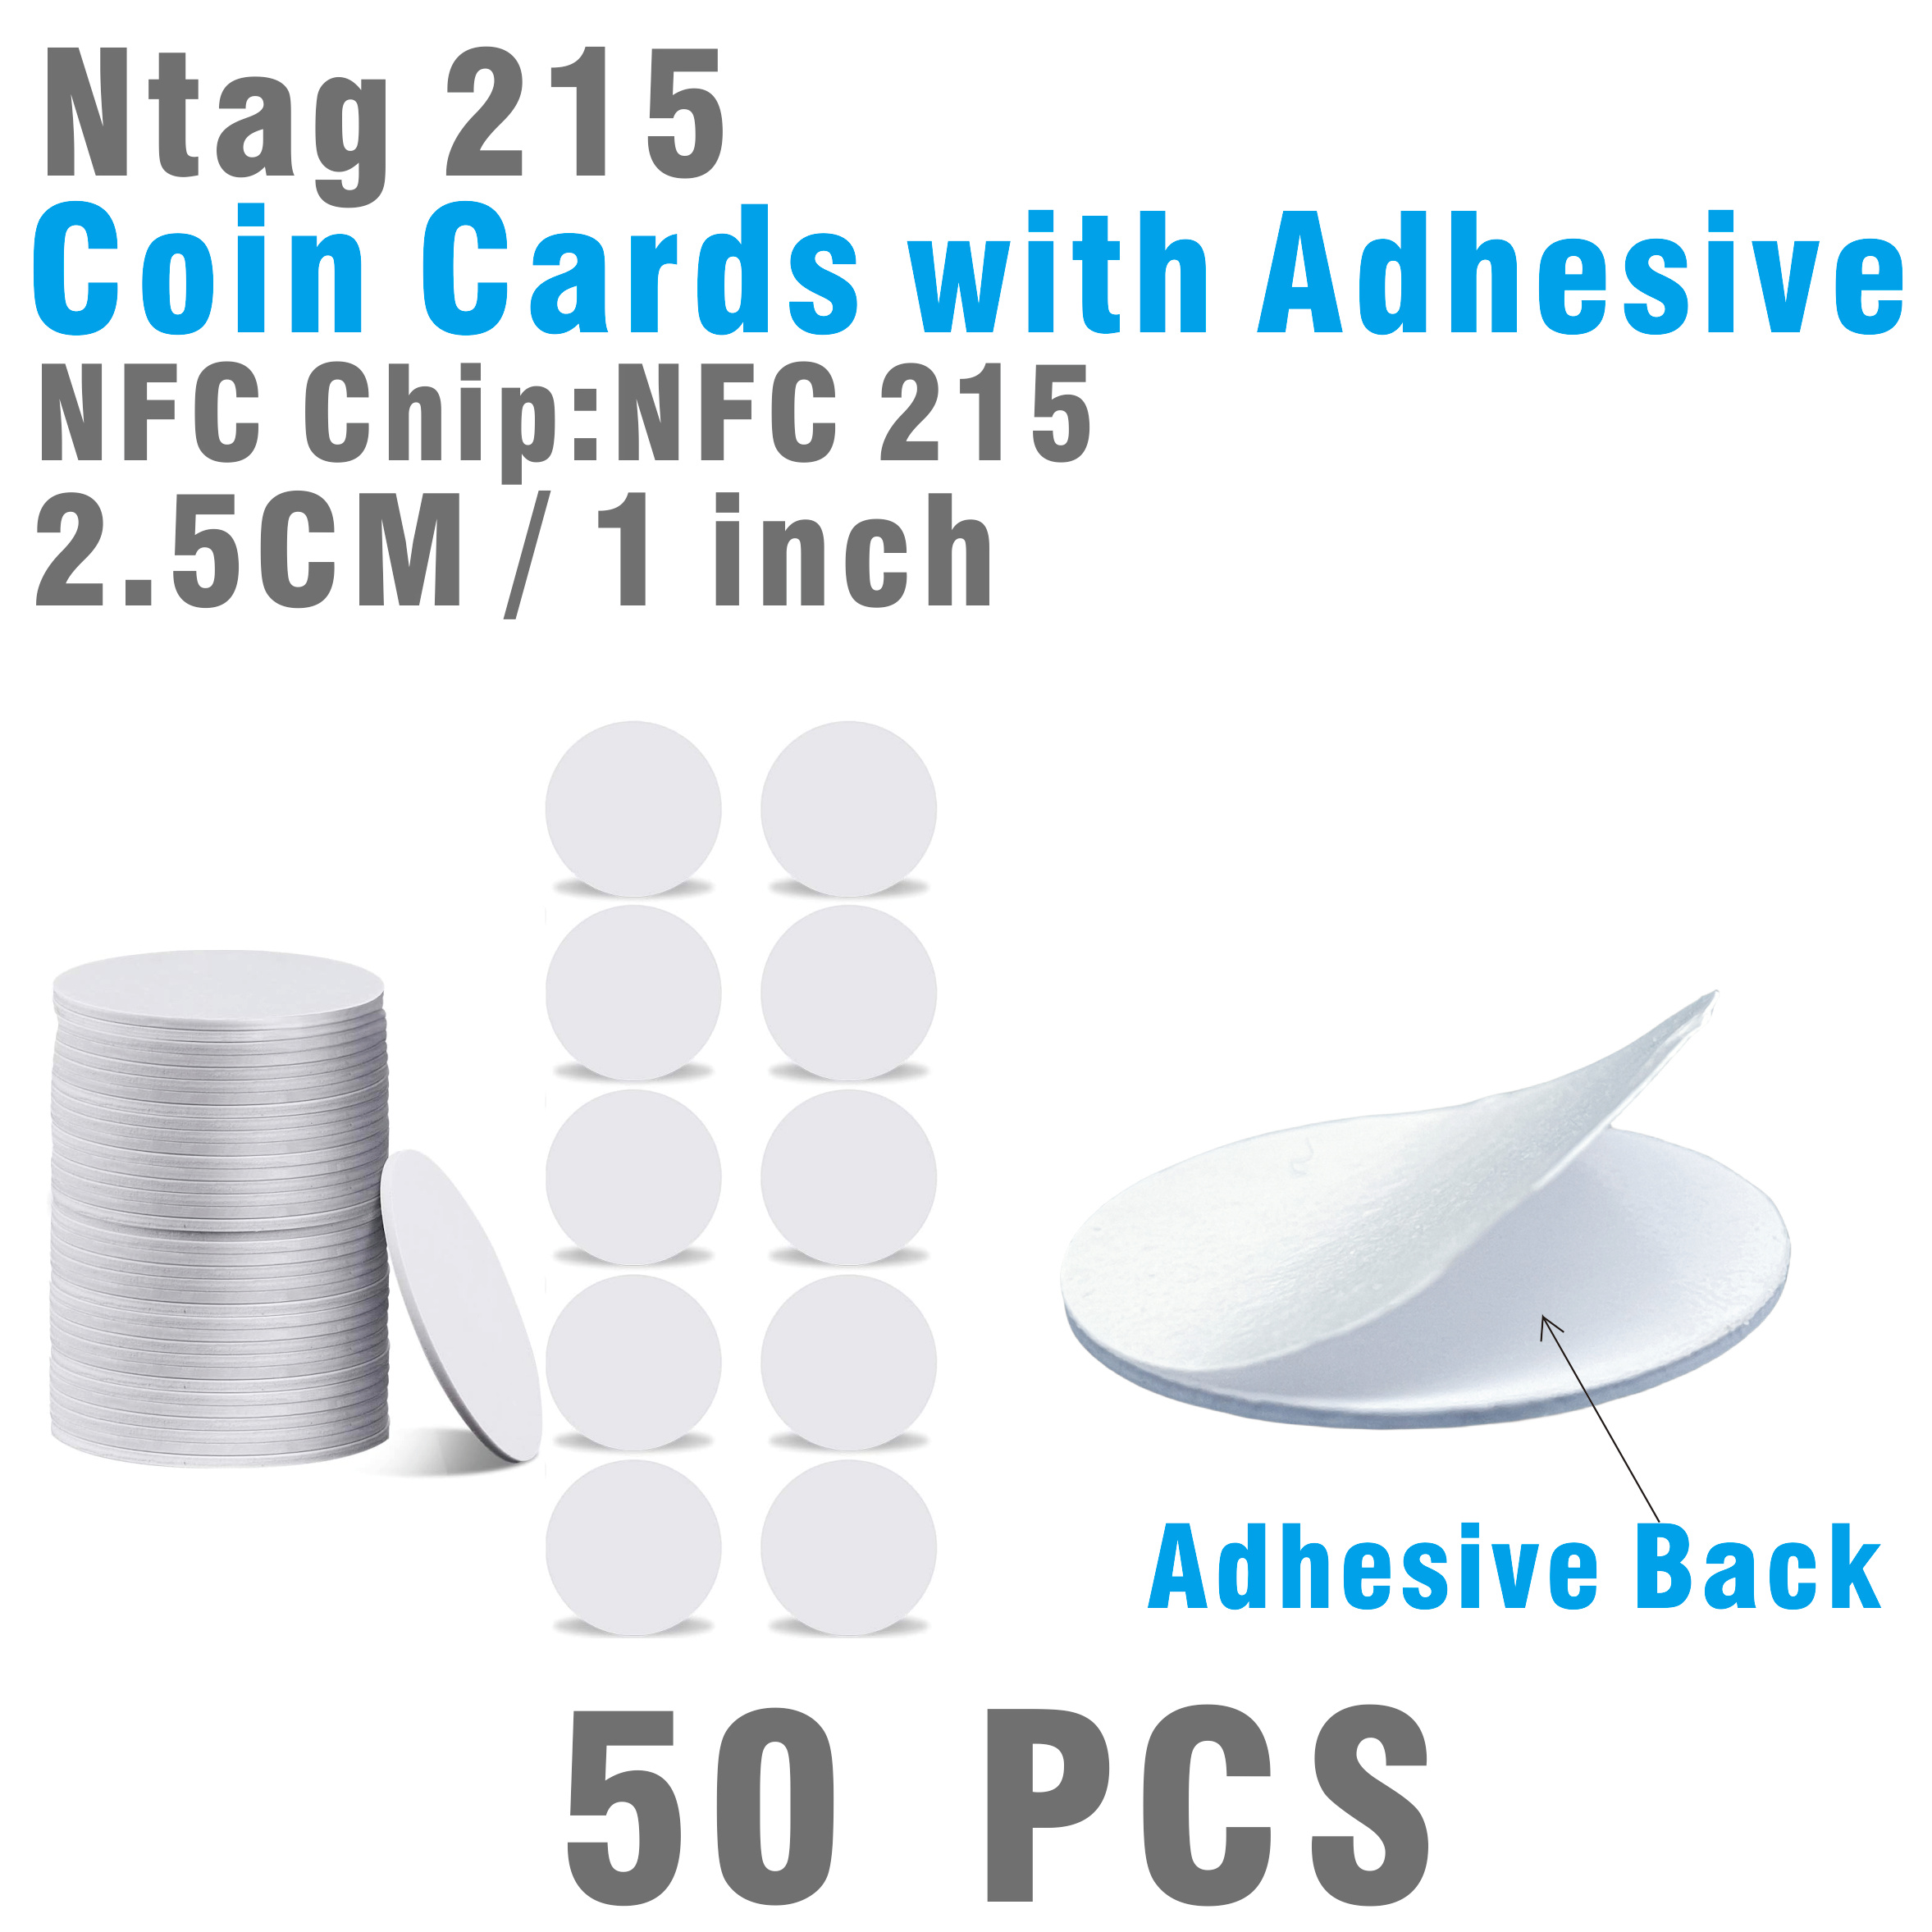 50pcs NFC Cards NFC Tags Ntag215 NFC chip NFC 215 tag rewritable NFC Coin  Cards，RFID Stickers Compatible with Tagmo and NFC Enabled Mobile Phones  and, nfc tag 